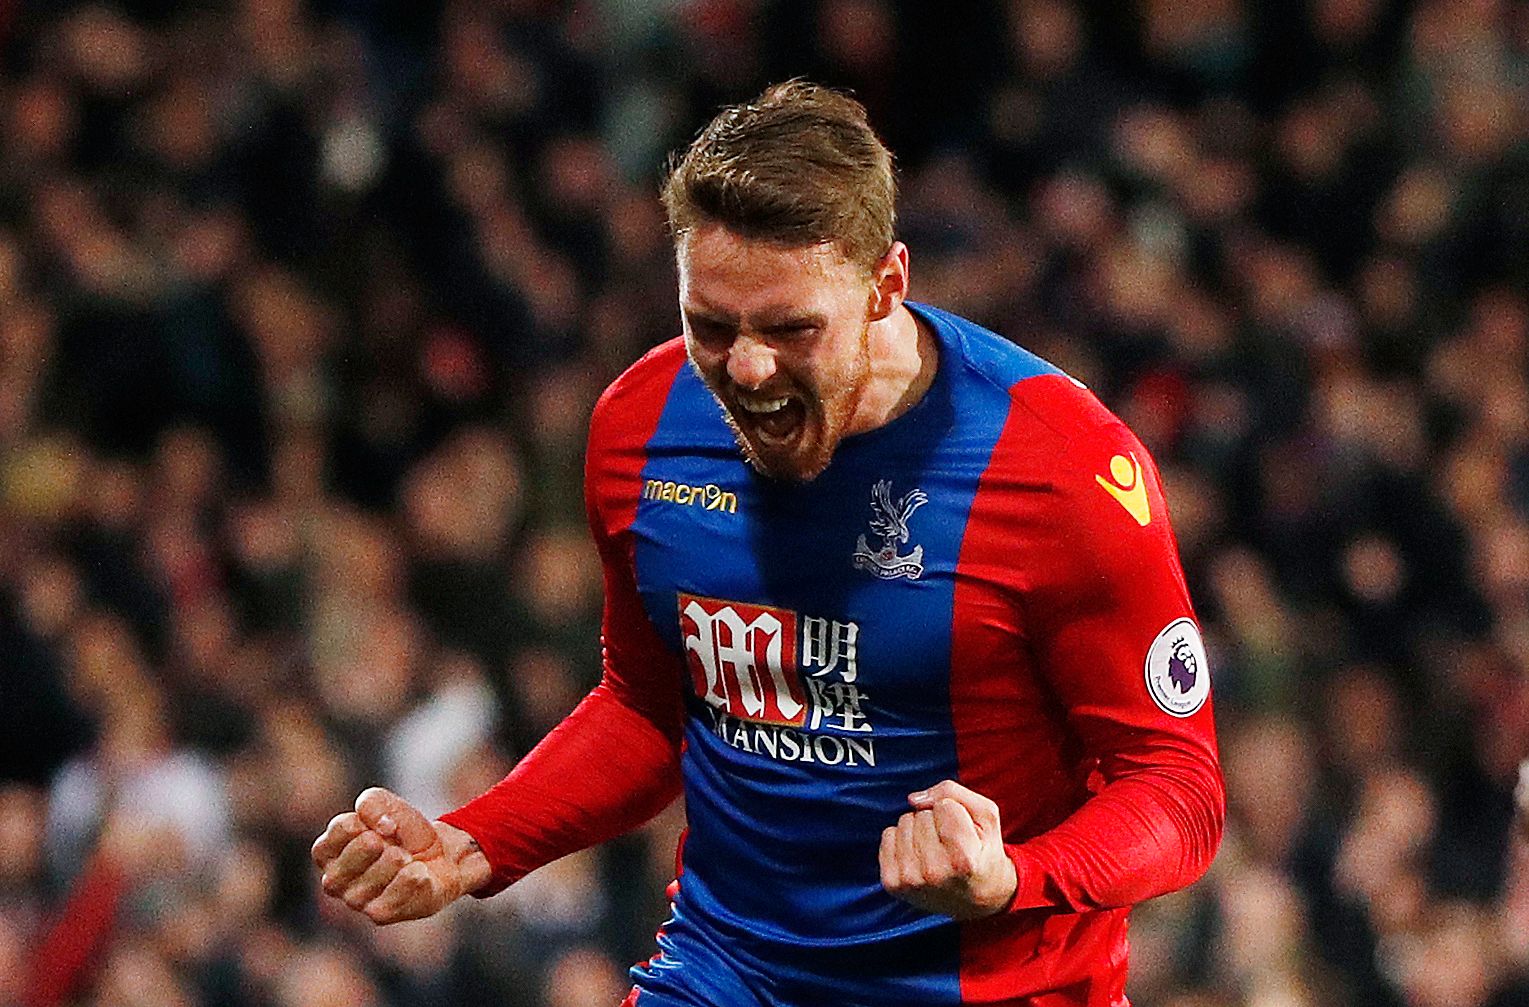 Britain Football Soccer - Crystal Palace v Manchester City - Premier League - Selhurst Park - 19/11/16 Crystal Palace's Connor Wickham celebrates scoring their first goal  Action Images via Reuters / John Sibley Livepic EDITORIAL USE ONLY. No use with unauthorized audio, video, data, fixture lists, club/league logos or 